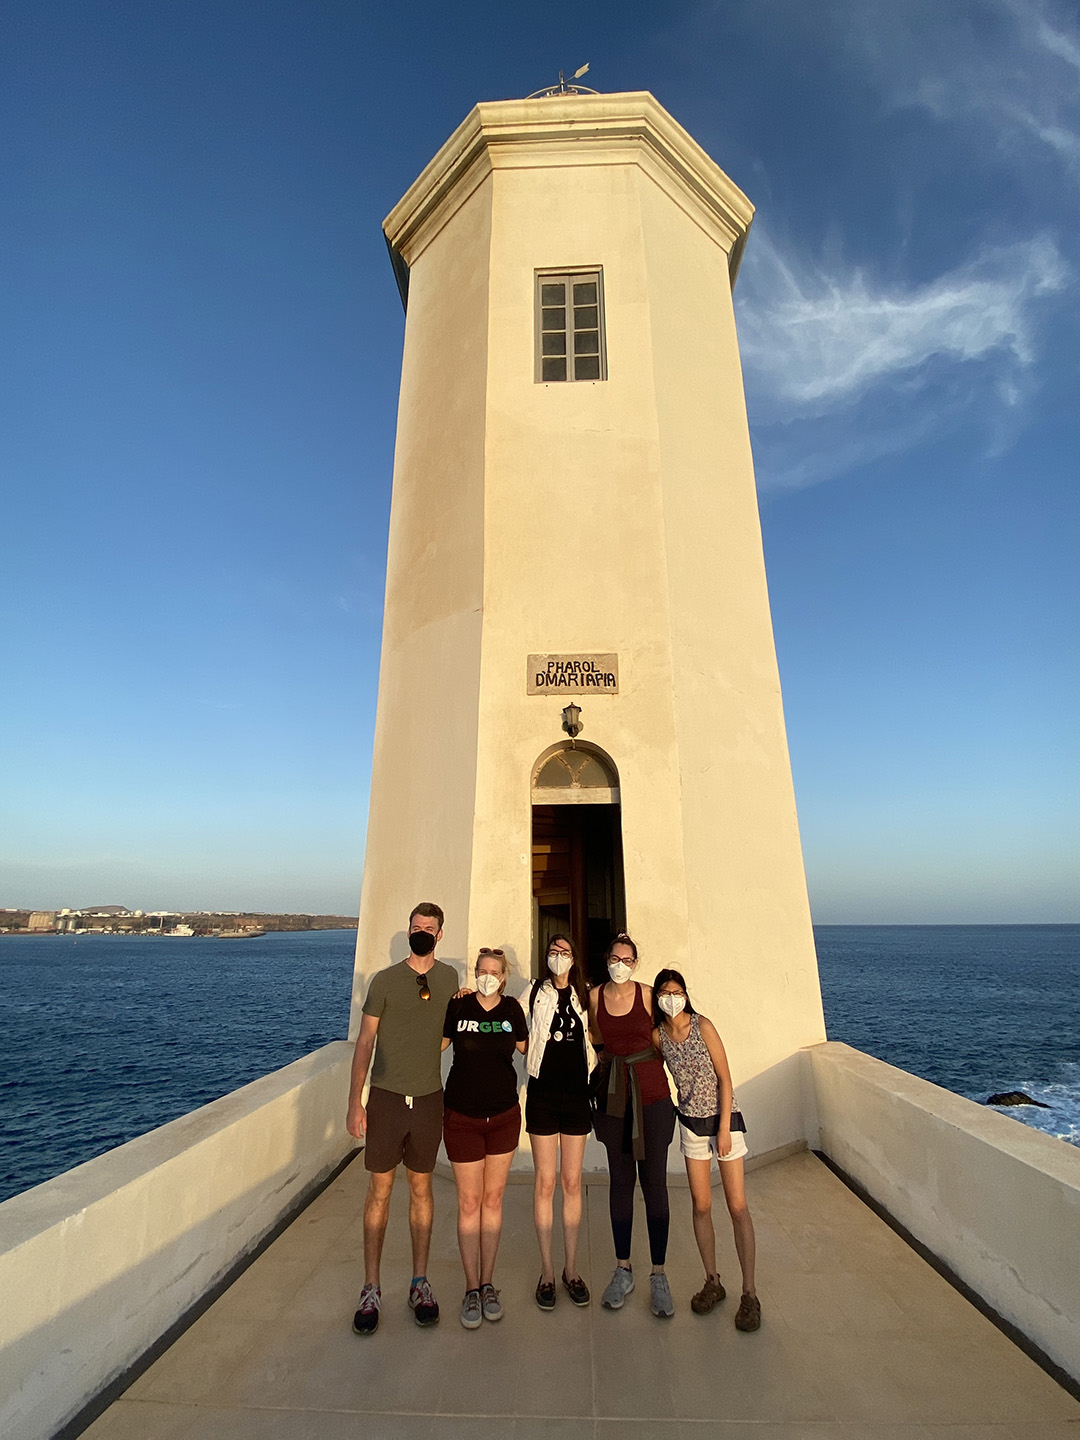 student members of the A13.5 science team, pose at the Praia lighthouse.